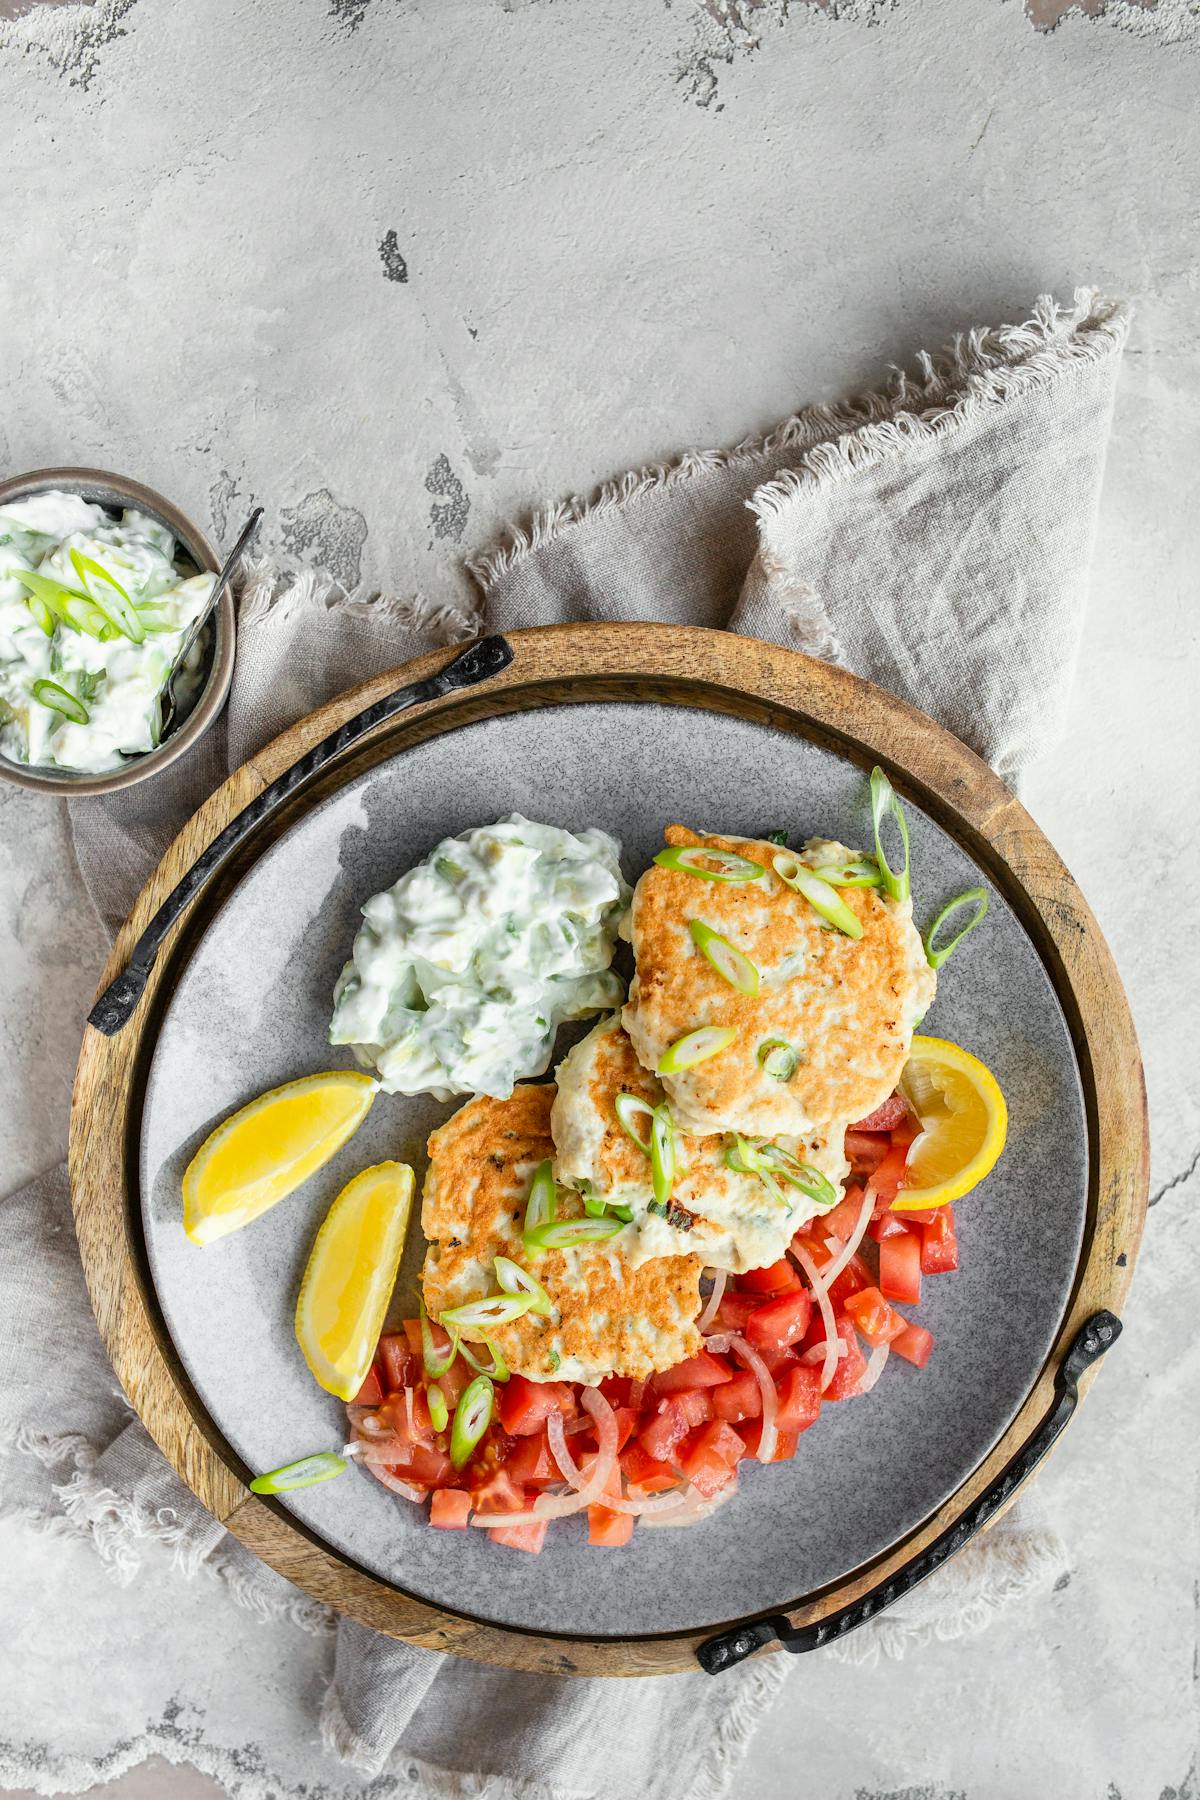 Keto chicken fritters with avocado tzatziki and tomato salad